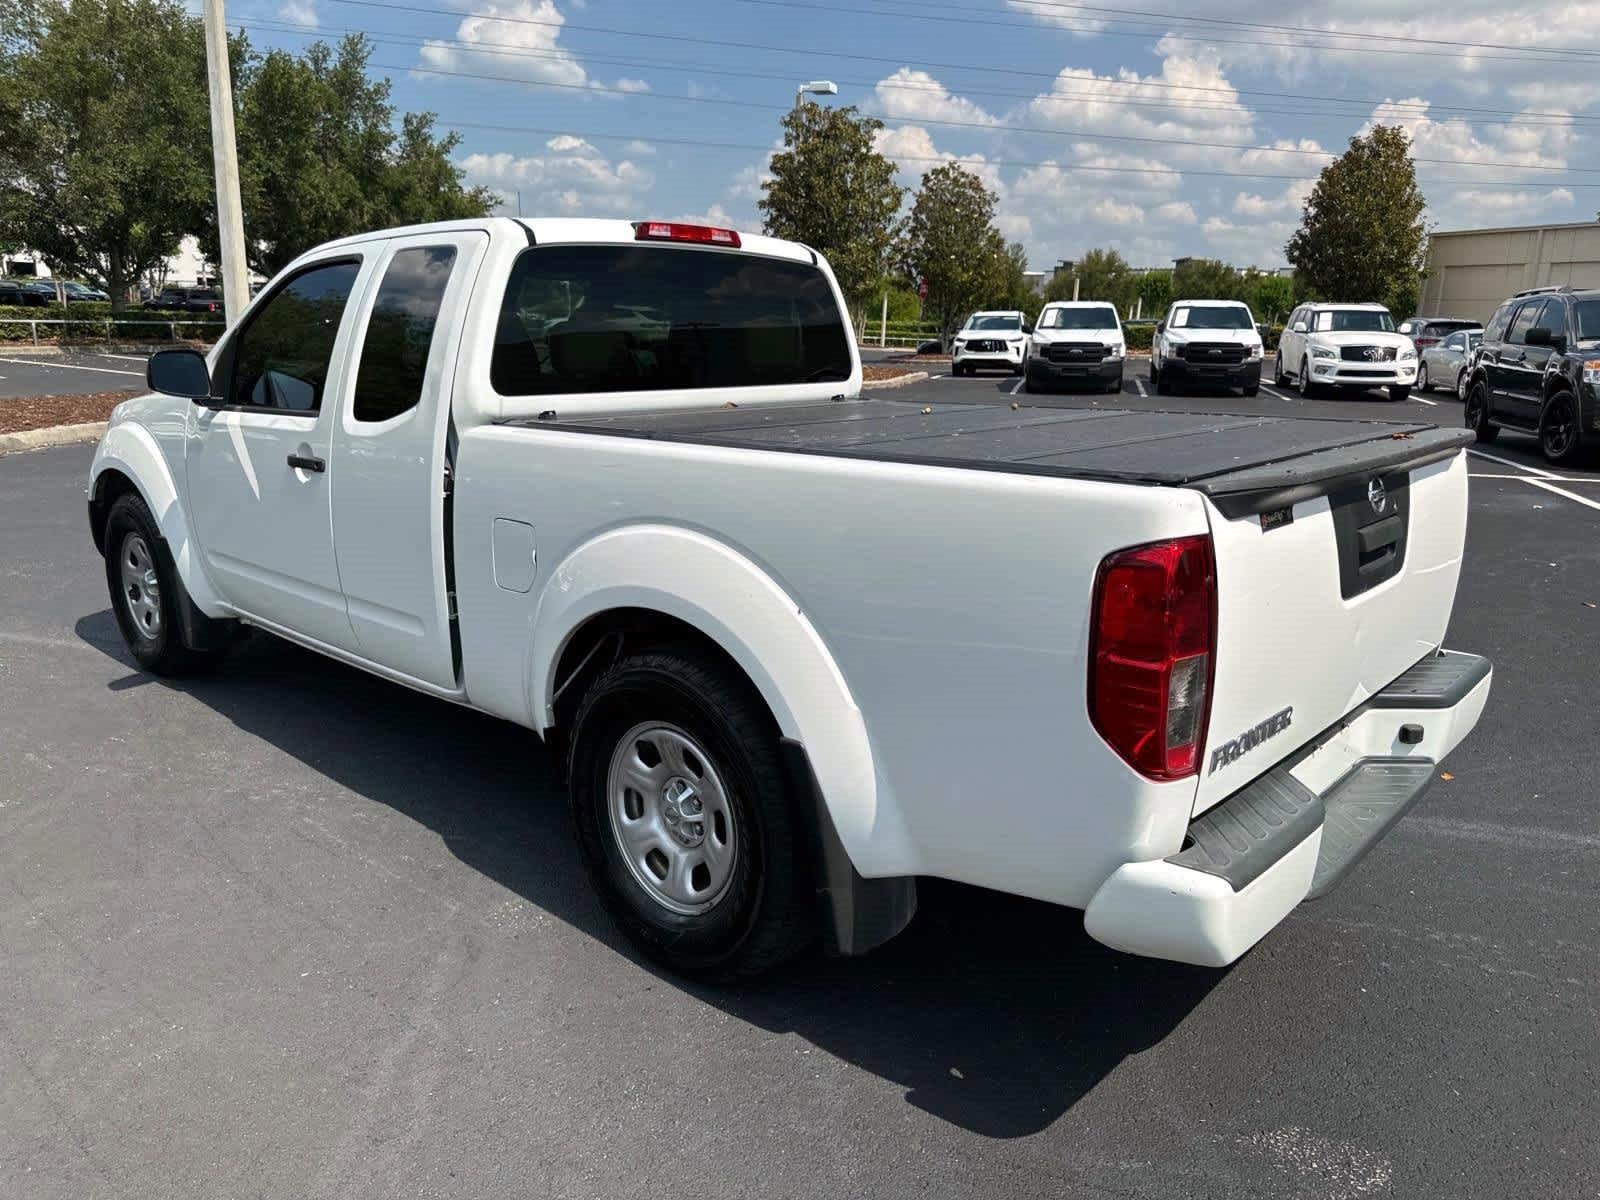 2021 Nissan Frontier S King Cab 4x2 Auto